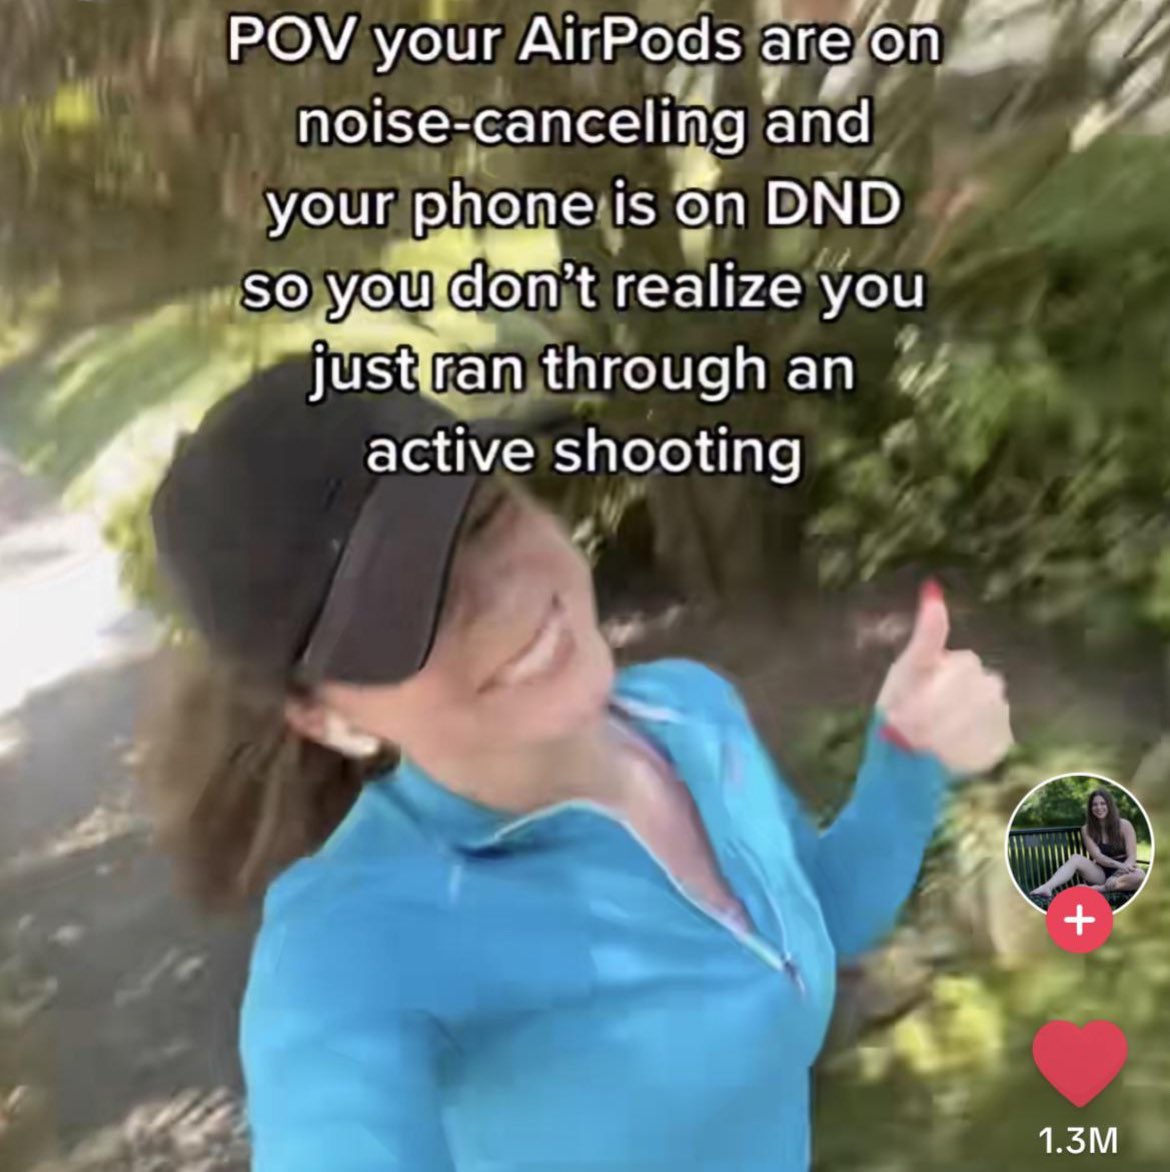 wild tiktok screenshots - water - Pov your AirPods are on noisecanceling and your phone is on Dnd so you don't realize you just ran through an active shooting x 1.3M